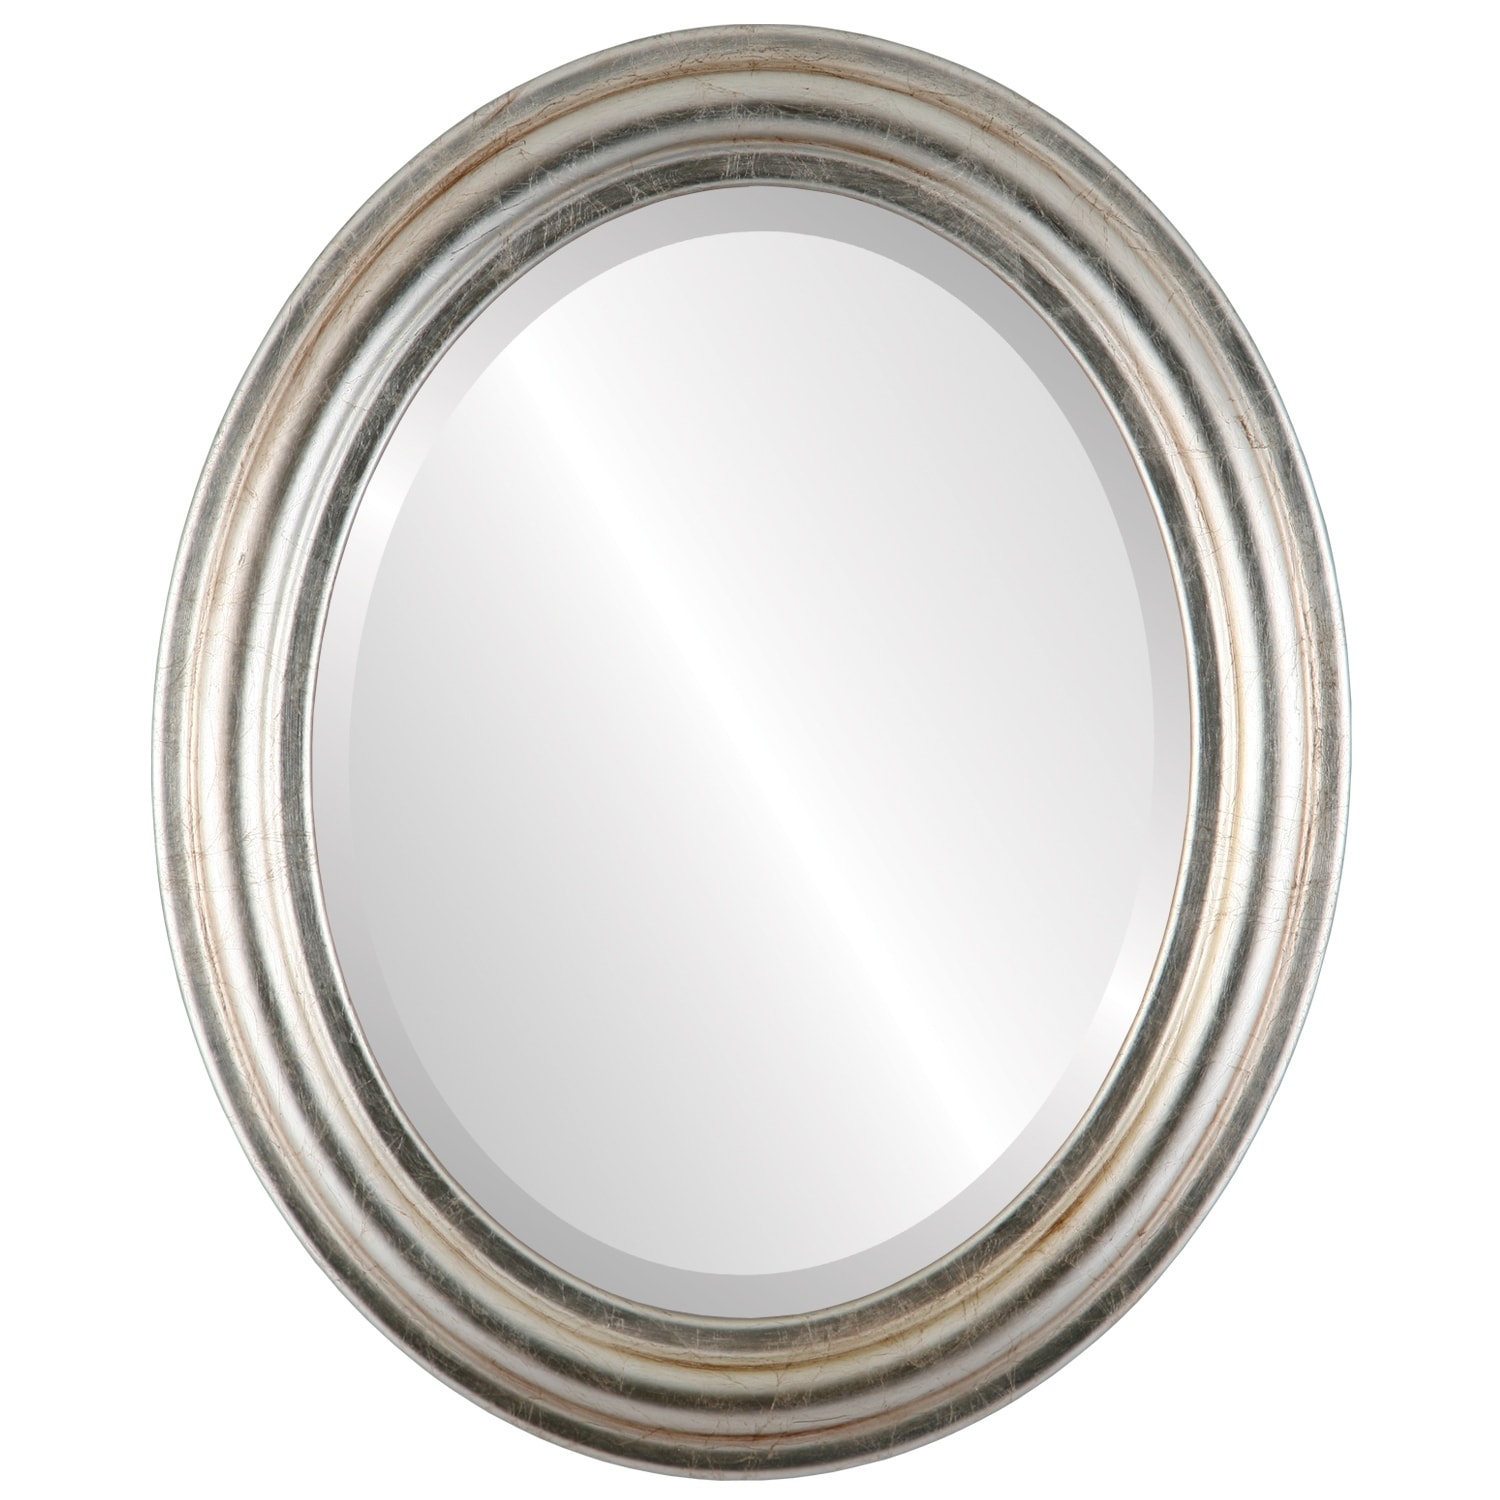 Philadelphia Framed Oval Mirror in Silver Leaf with Brown Antique Silver/Brown  Bed Bath  Beyond 20731048